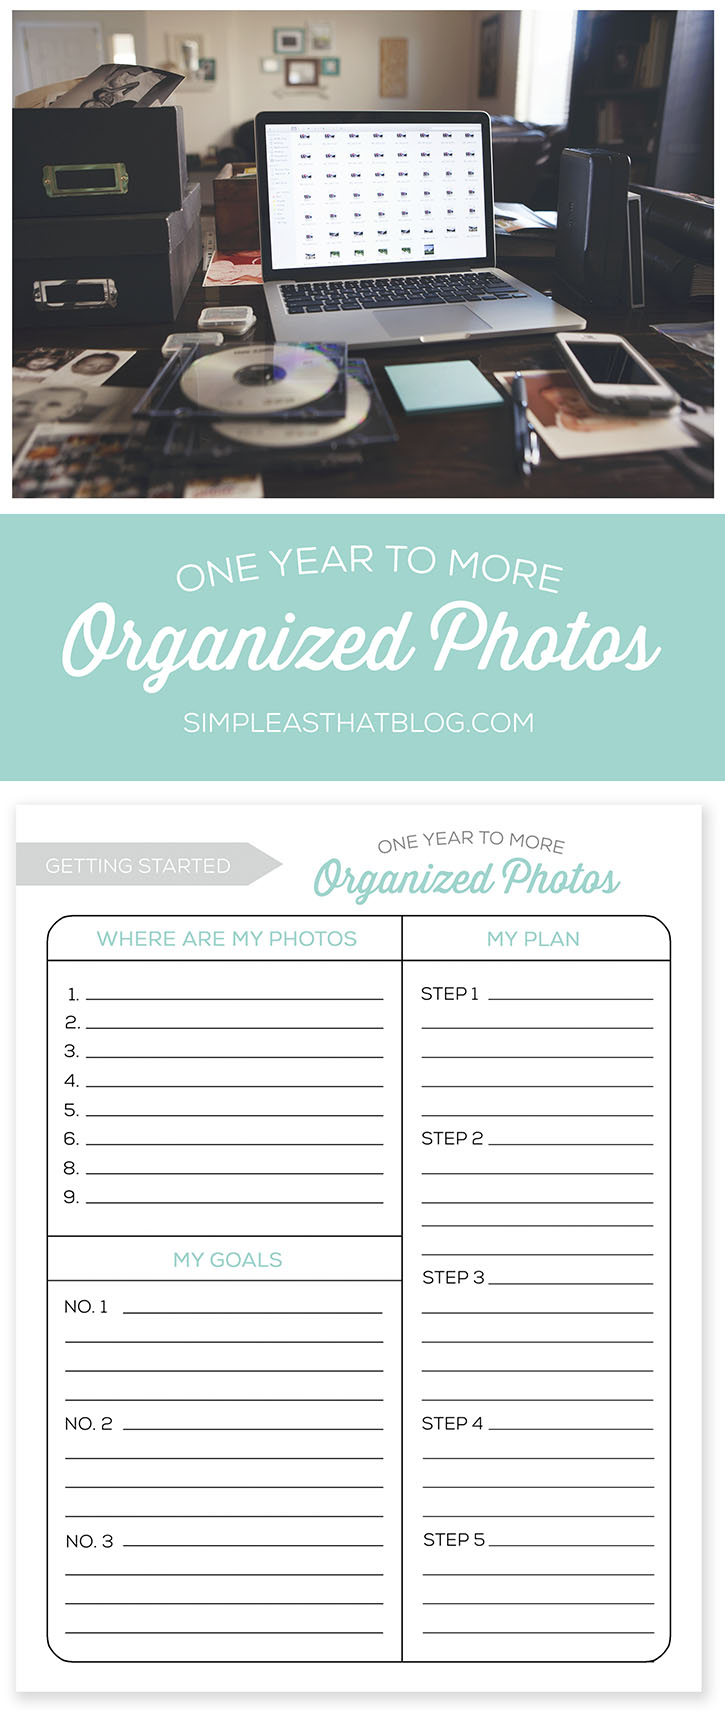 Getting Started: One Year to More Organized Photos. Where to begin when it comes to getting your photo clutter under control!